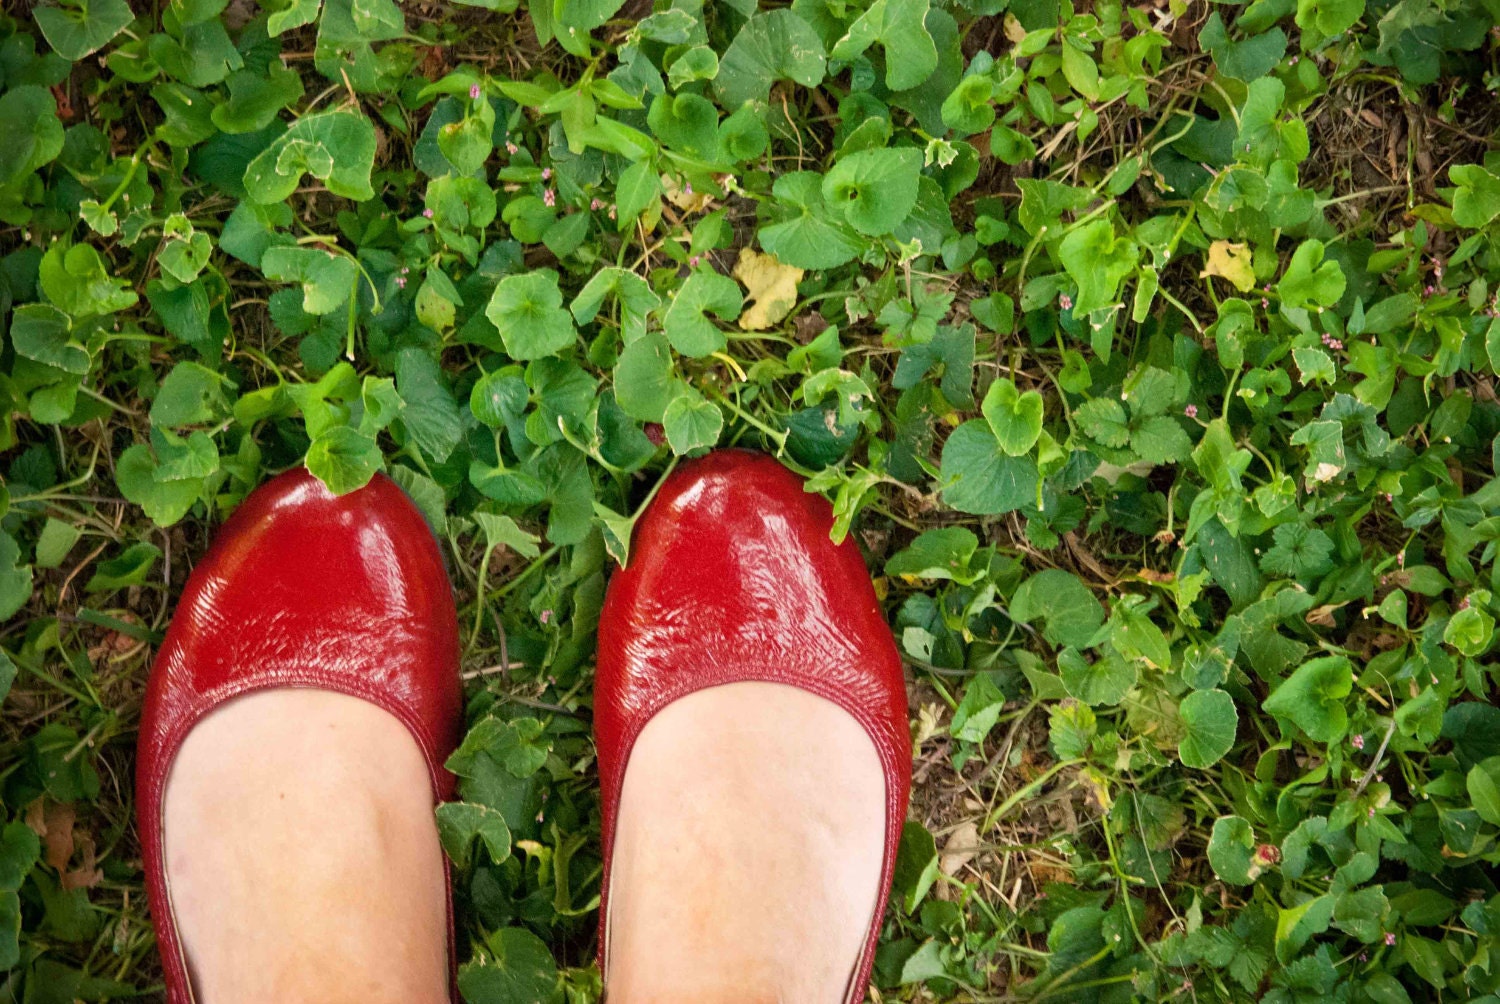 Little Red Shoes - 5 X 7 Photography Photo Art Print - Red Shoes Clover Grass Red Green Fashion